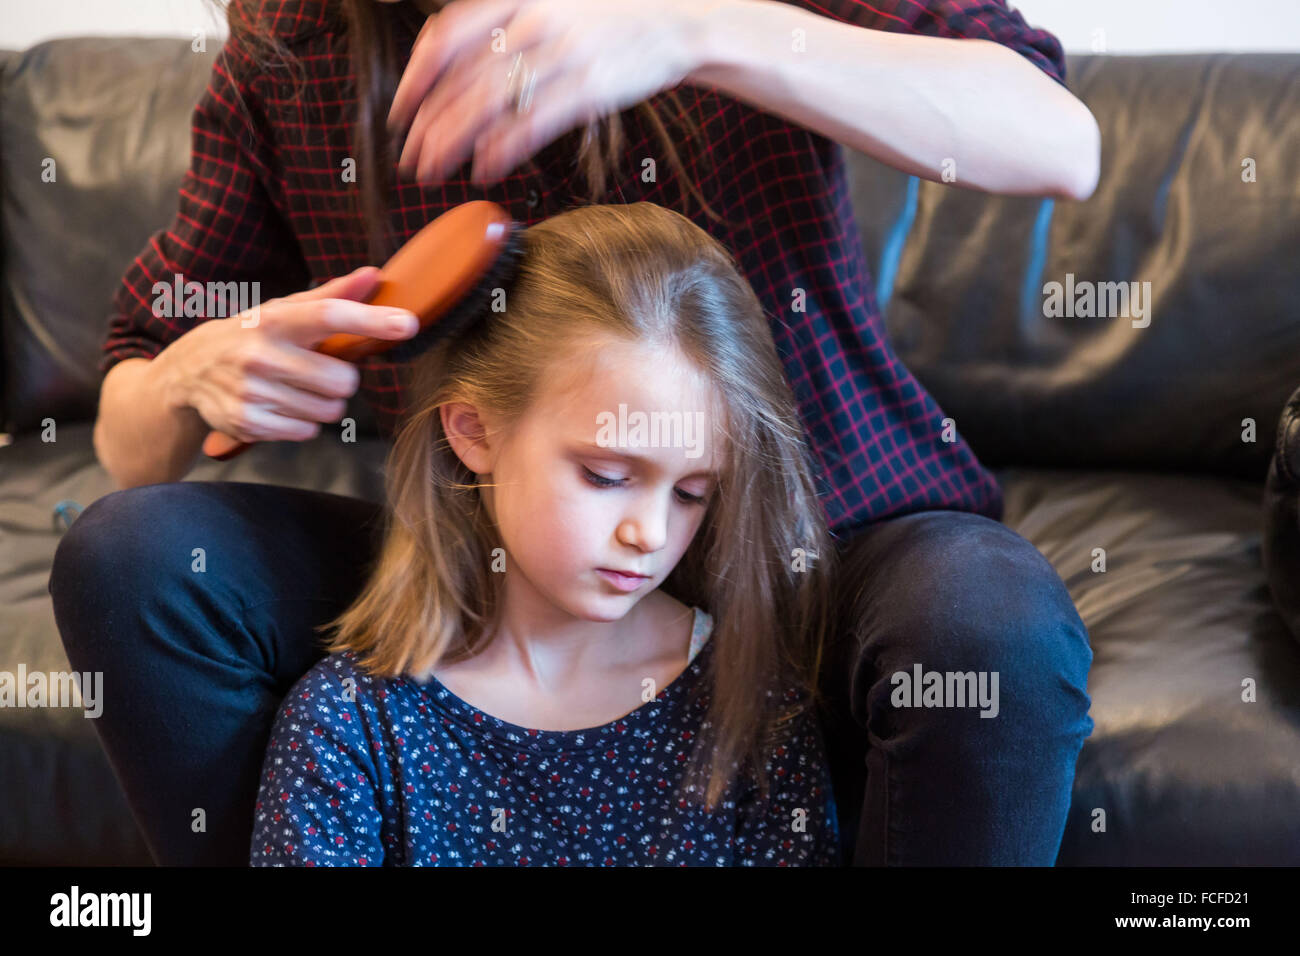 Mother combing her 6 year-old daughter's hair. Stock Photo